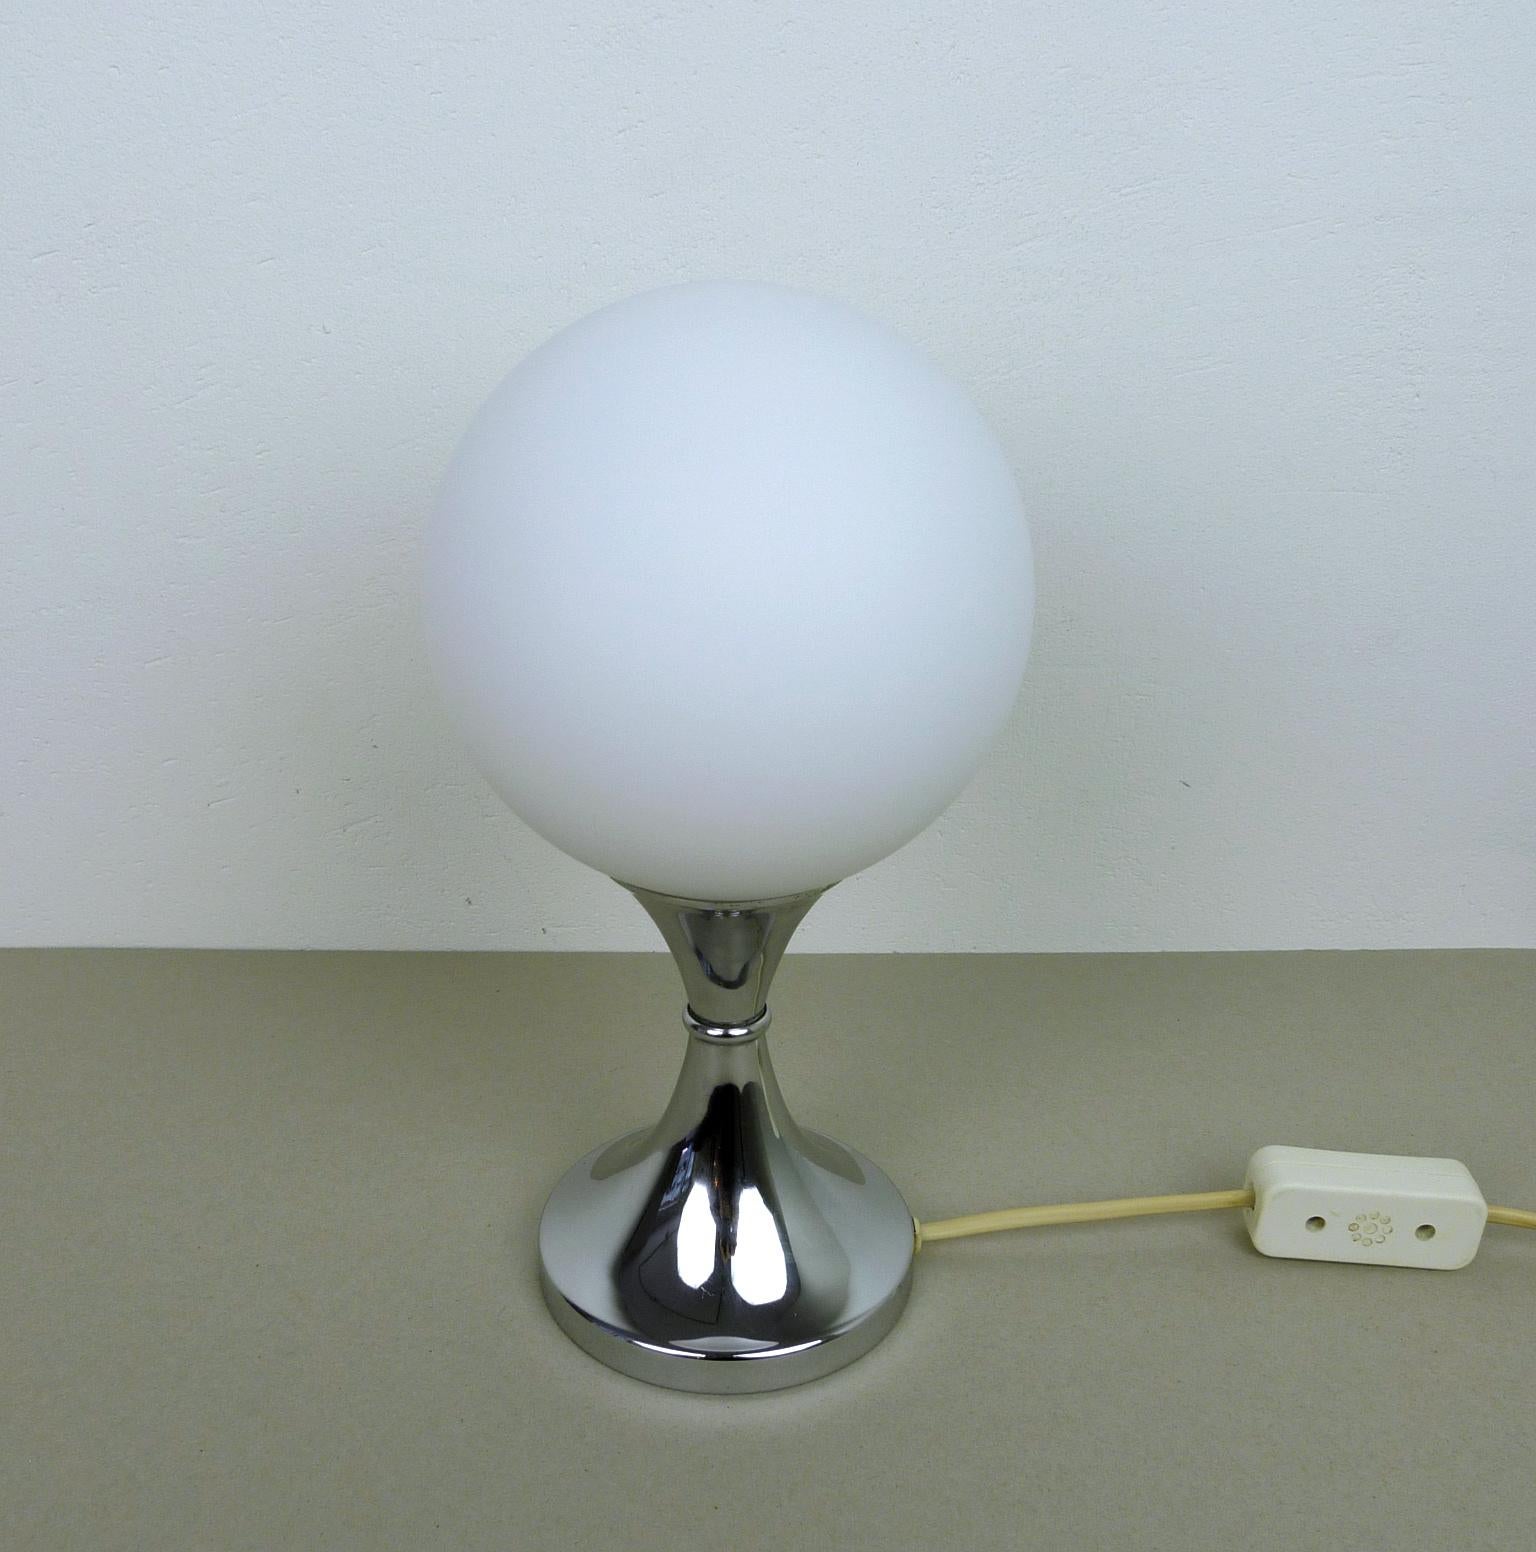 Space Age Table Lamp with Tulip Base from Bankamp Leuchten, Germany, 1960s